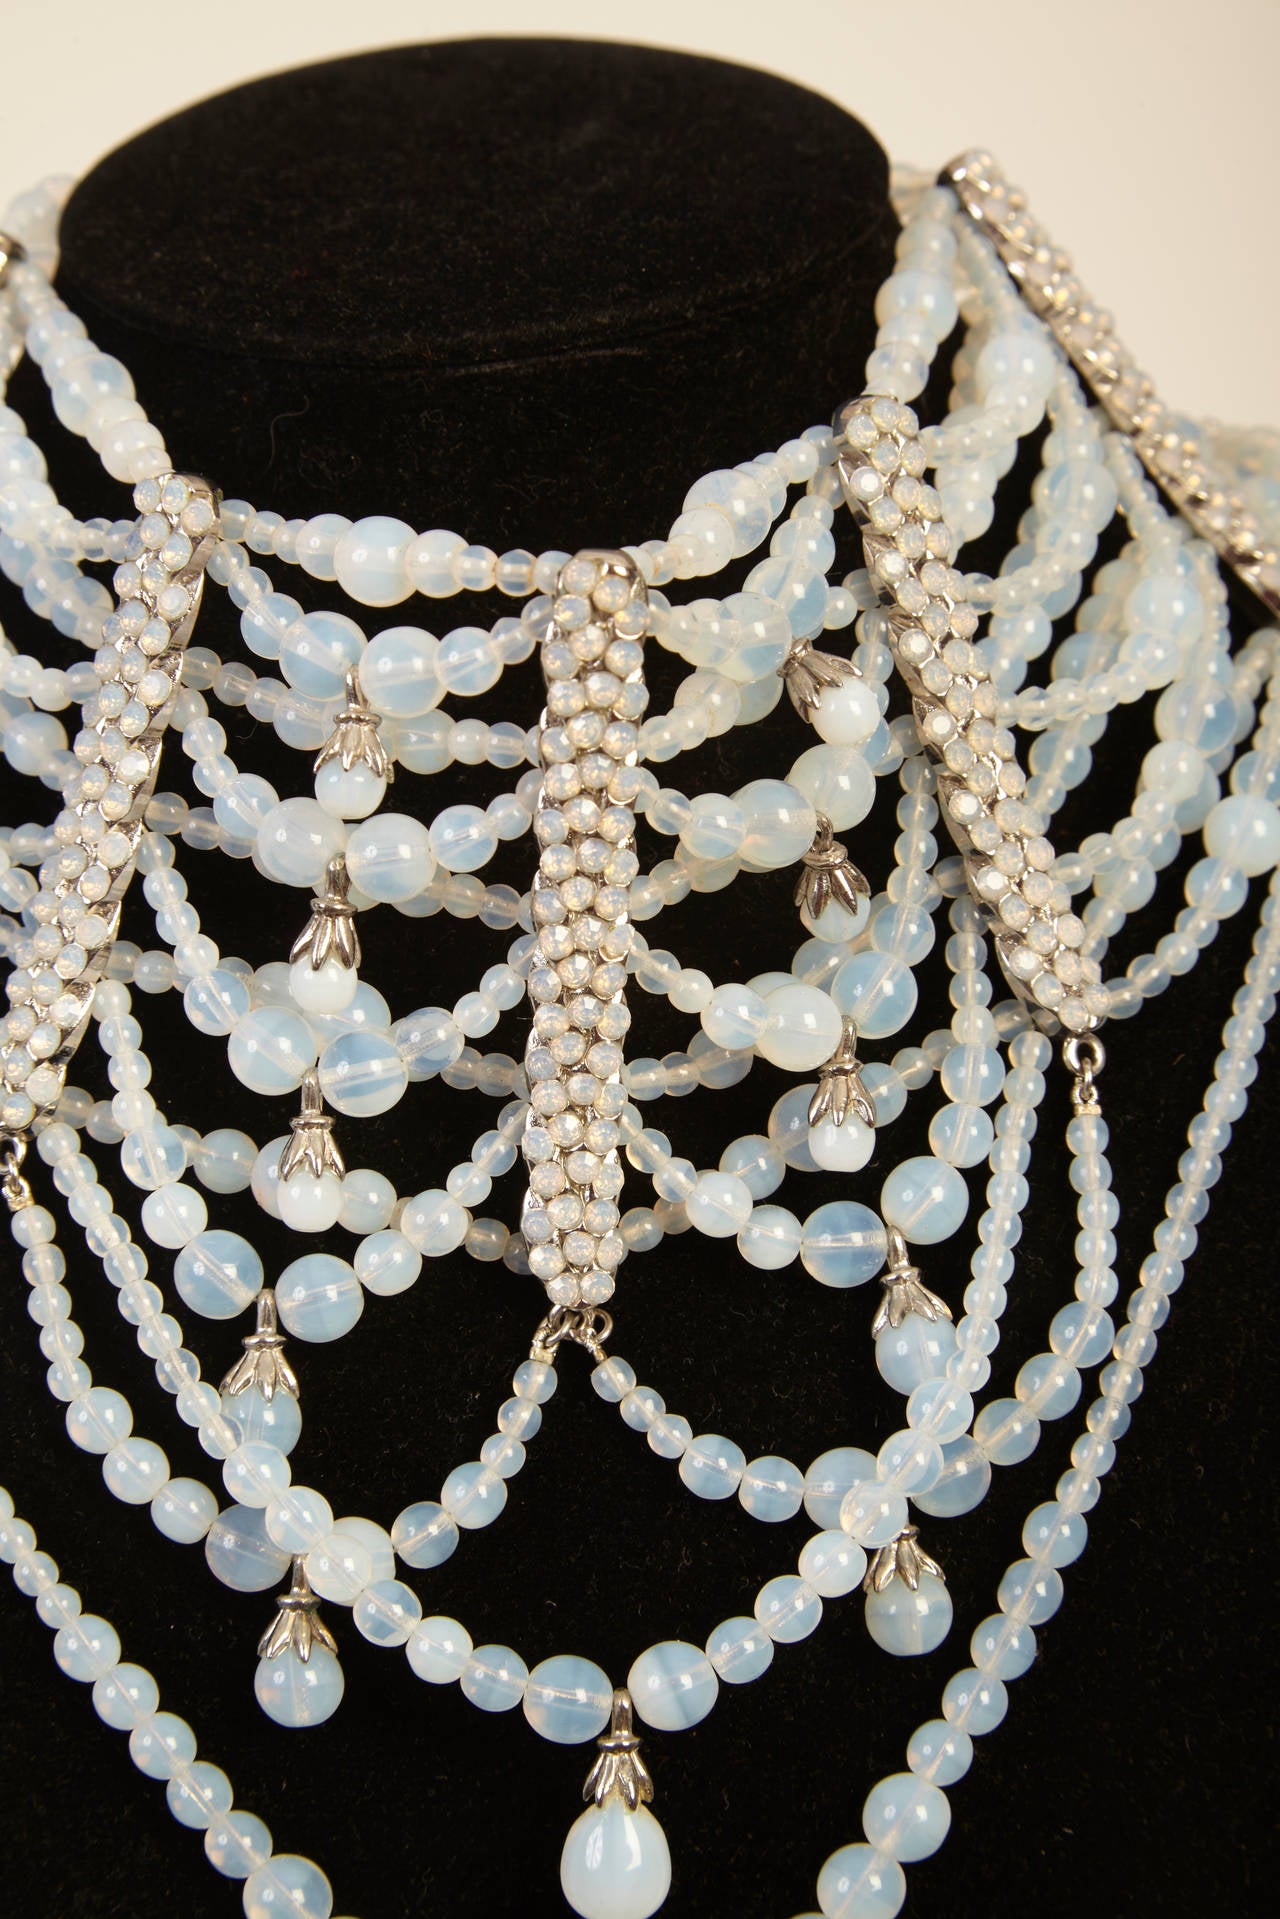 This one of a kind choker necklace contains an incredible array of ivory and aqua beading, which creates an impeccable draped effect. With this magnificent accessory and its timeless elegance, you will be deemed the most stunning and sophisticated